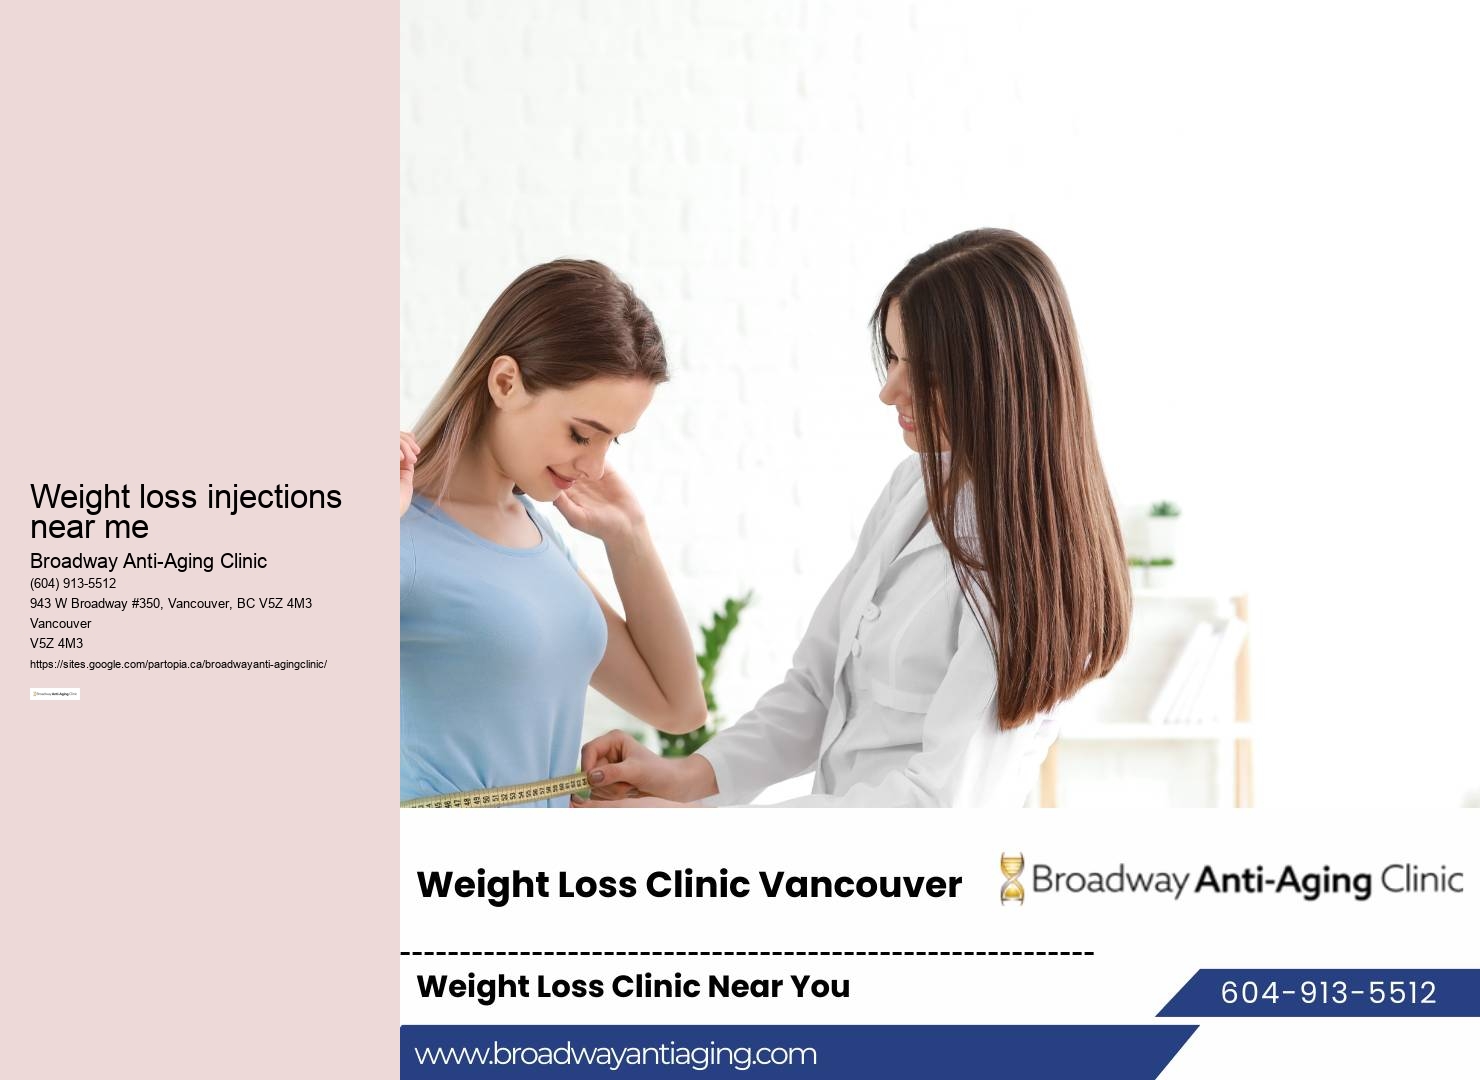 Weight loss injections near me